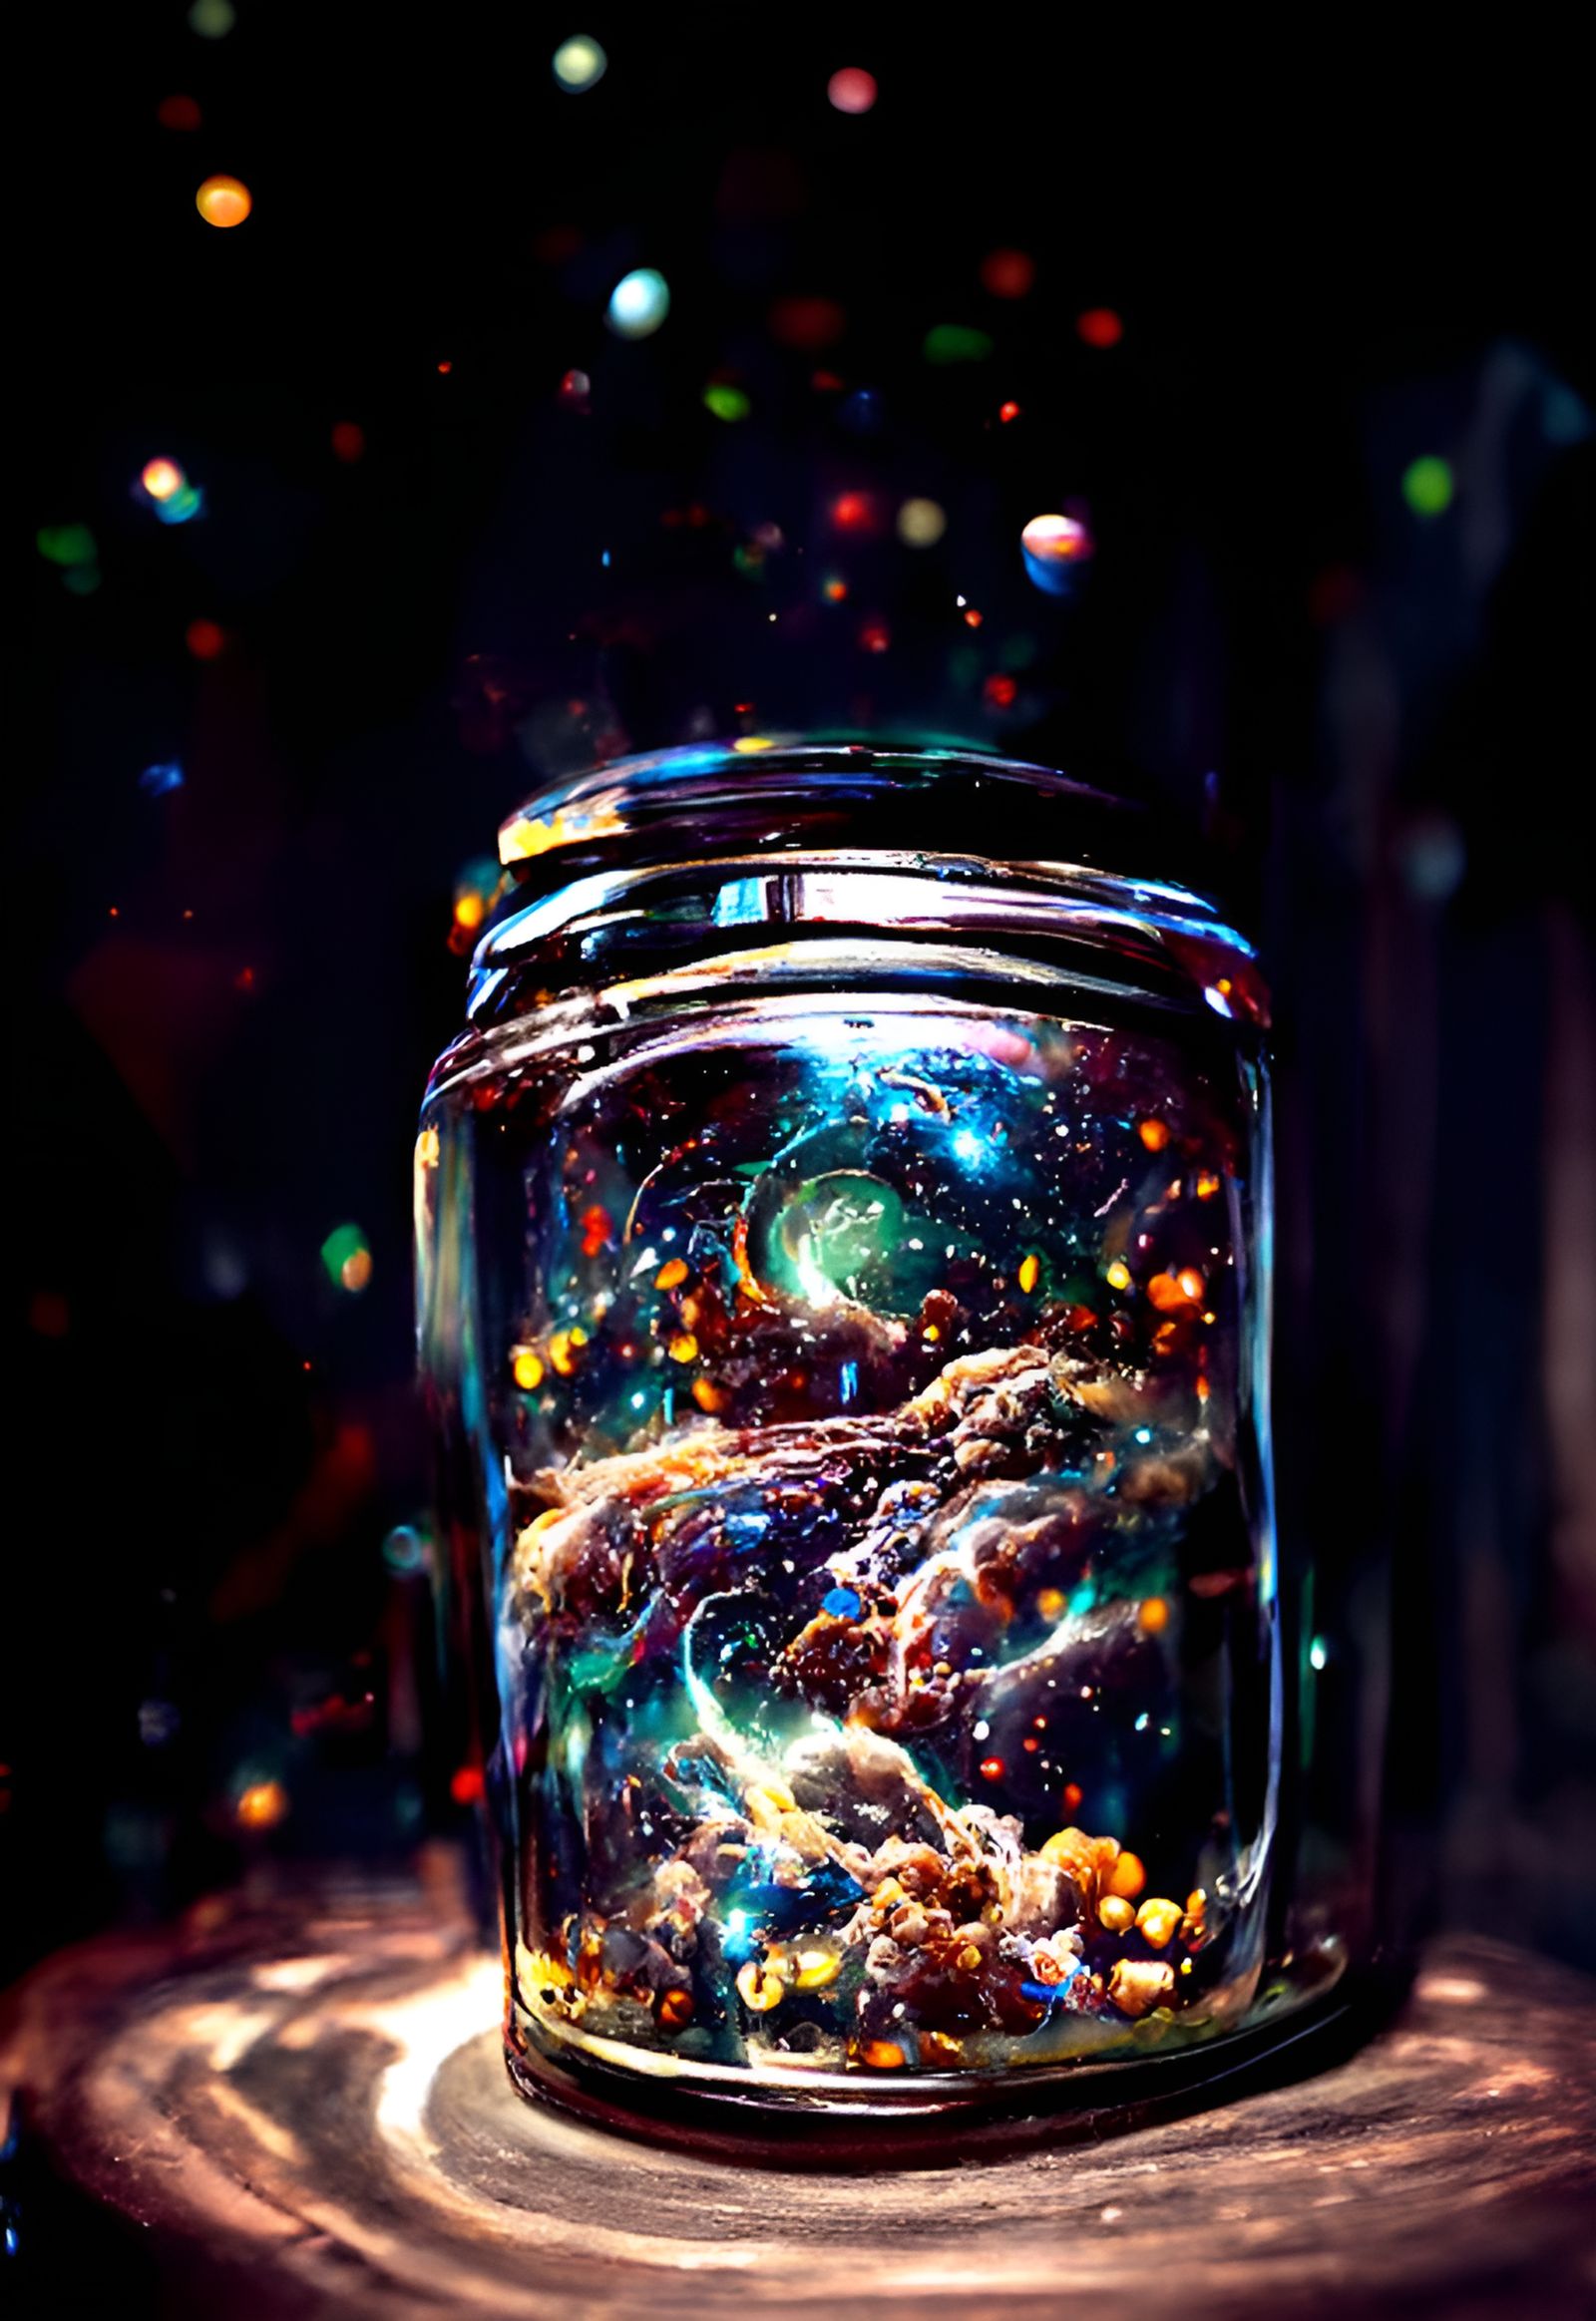 Universe in a jar! 100 likes in under 1 hr insane